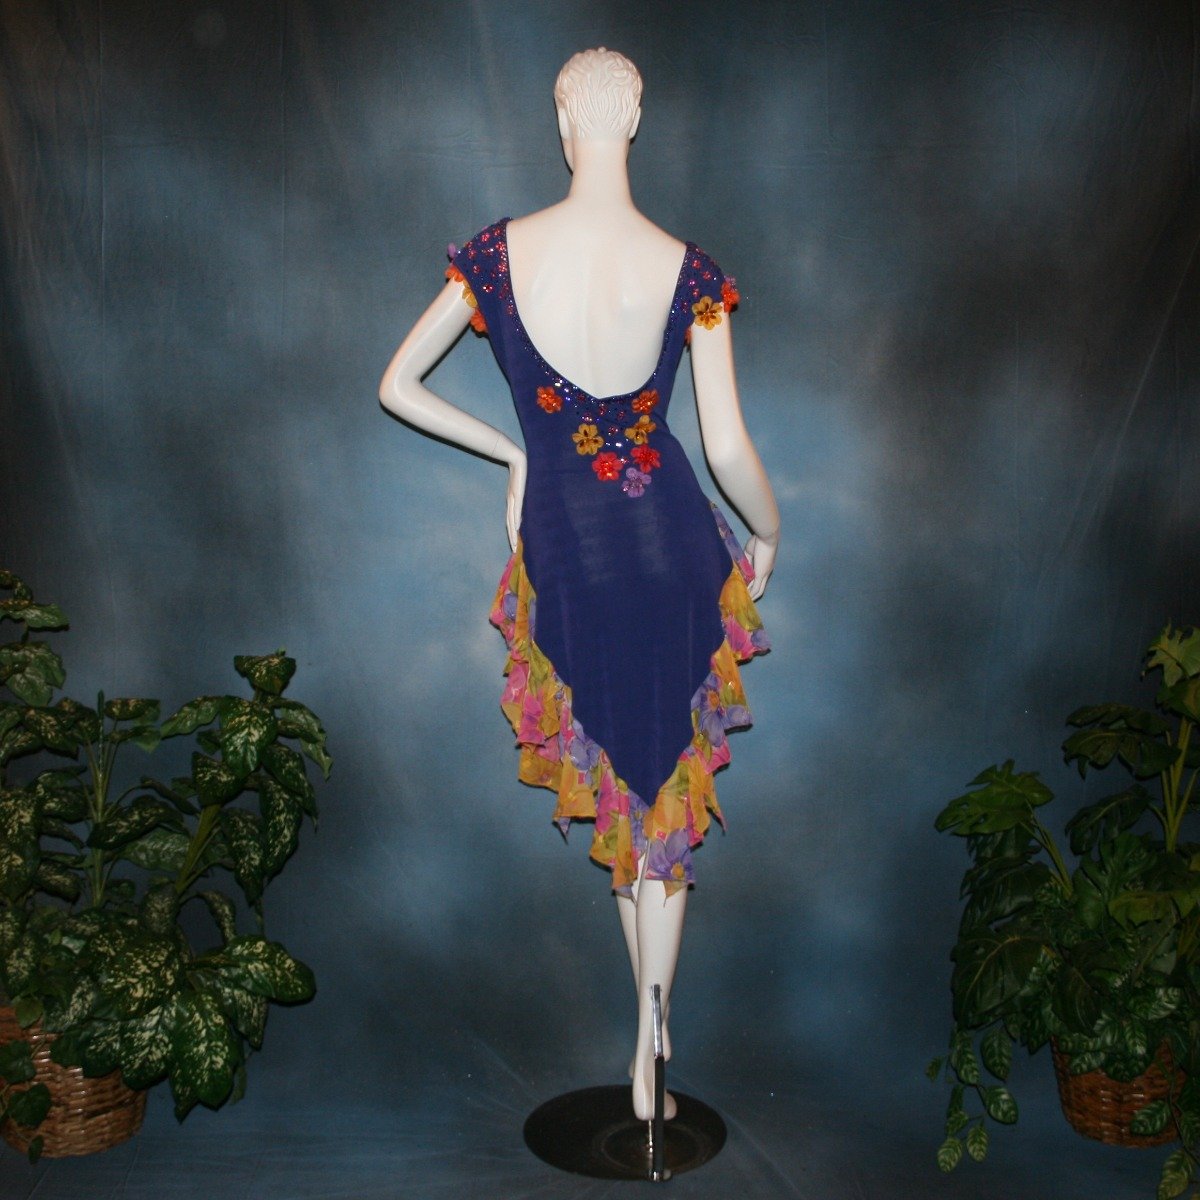 Crystal's Creations back view of Converta ballroom dress featuring a Latin/rhythm dress created in luxurious deep perwinkle solid slinky with lots of flounces in accents of a floral chiffon in yellow with pinks & purples